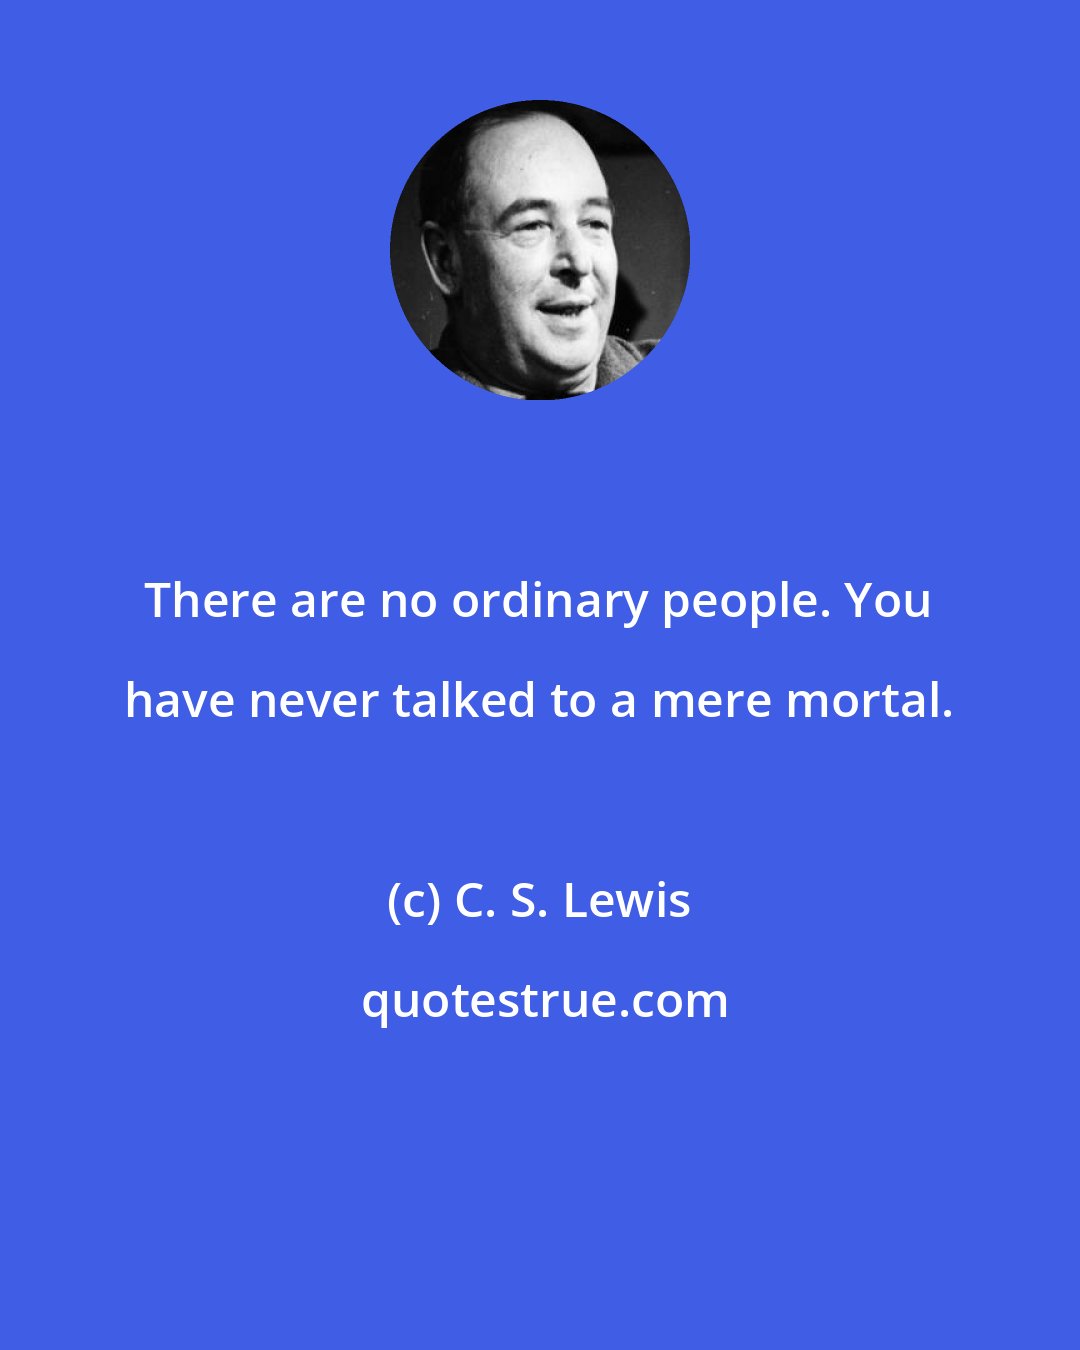 C. S. Lewis: There are no ordinary people. You have never talked to a mere mortal.